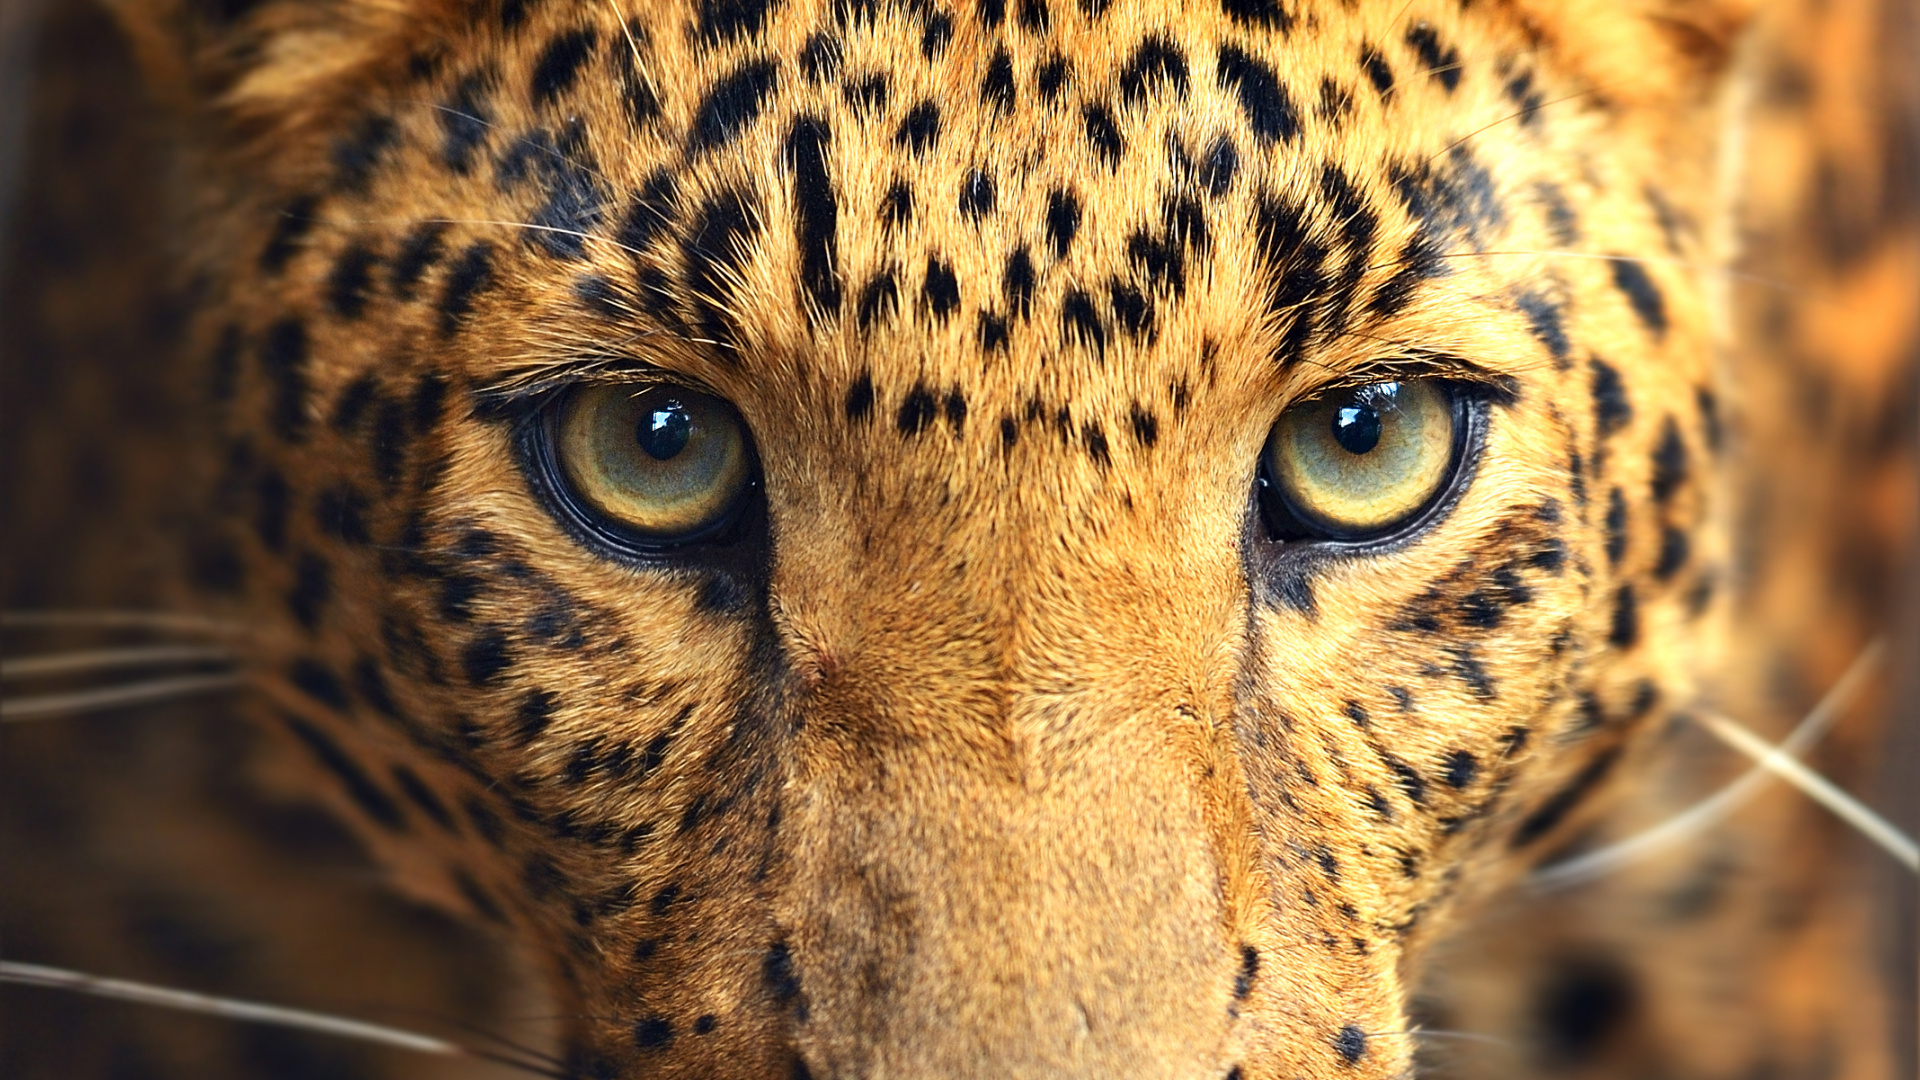 Brown and Black Leopard in Close up Photography. Wallpaper in 1920x1080 Resolution